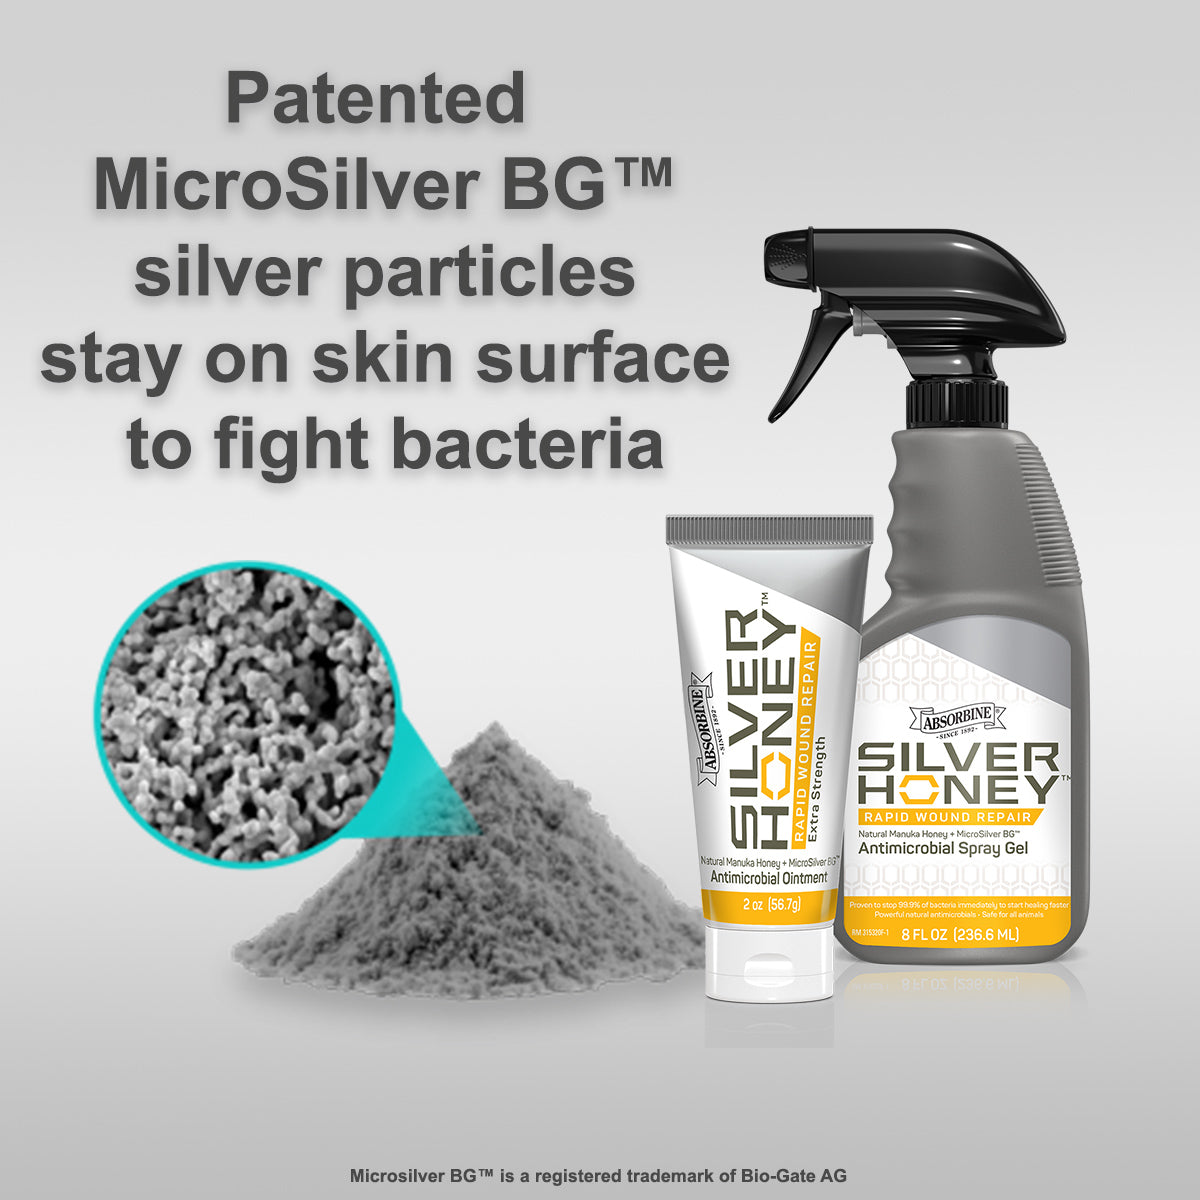 Silver Honey Rapid Wound Repair Ointment. Patented MicroSilver BG silver particles stay on the skin surface to fight bacteria.